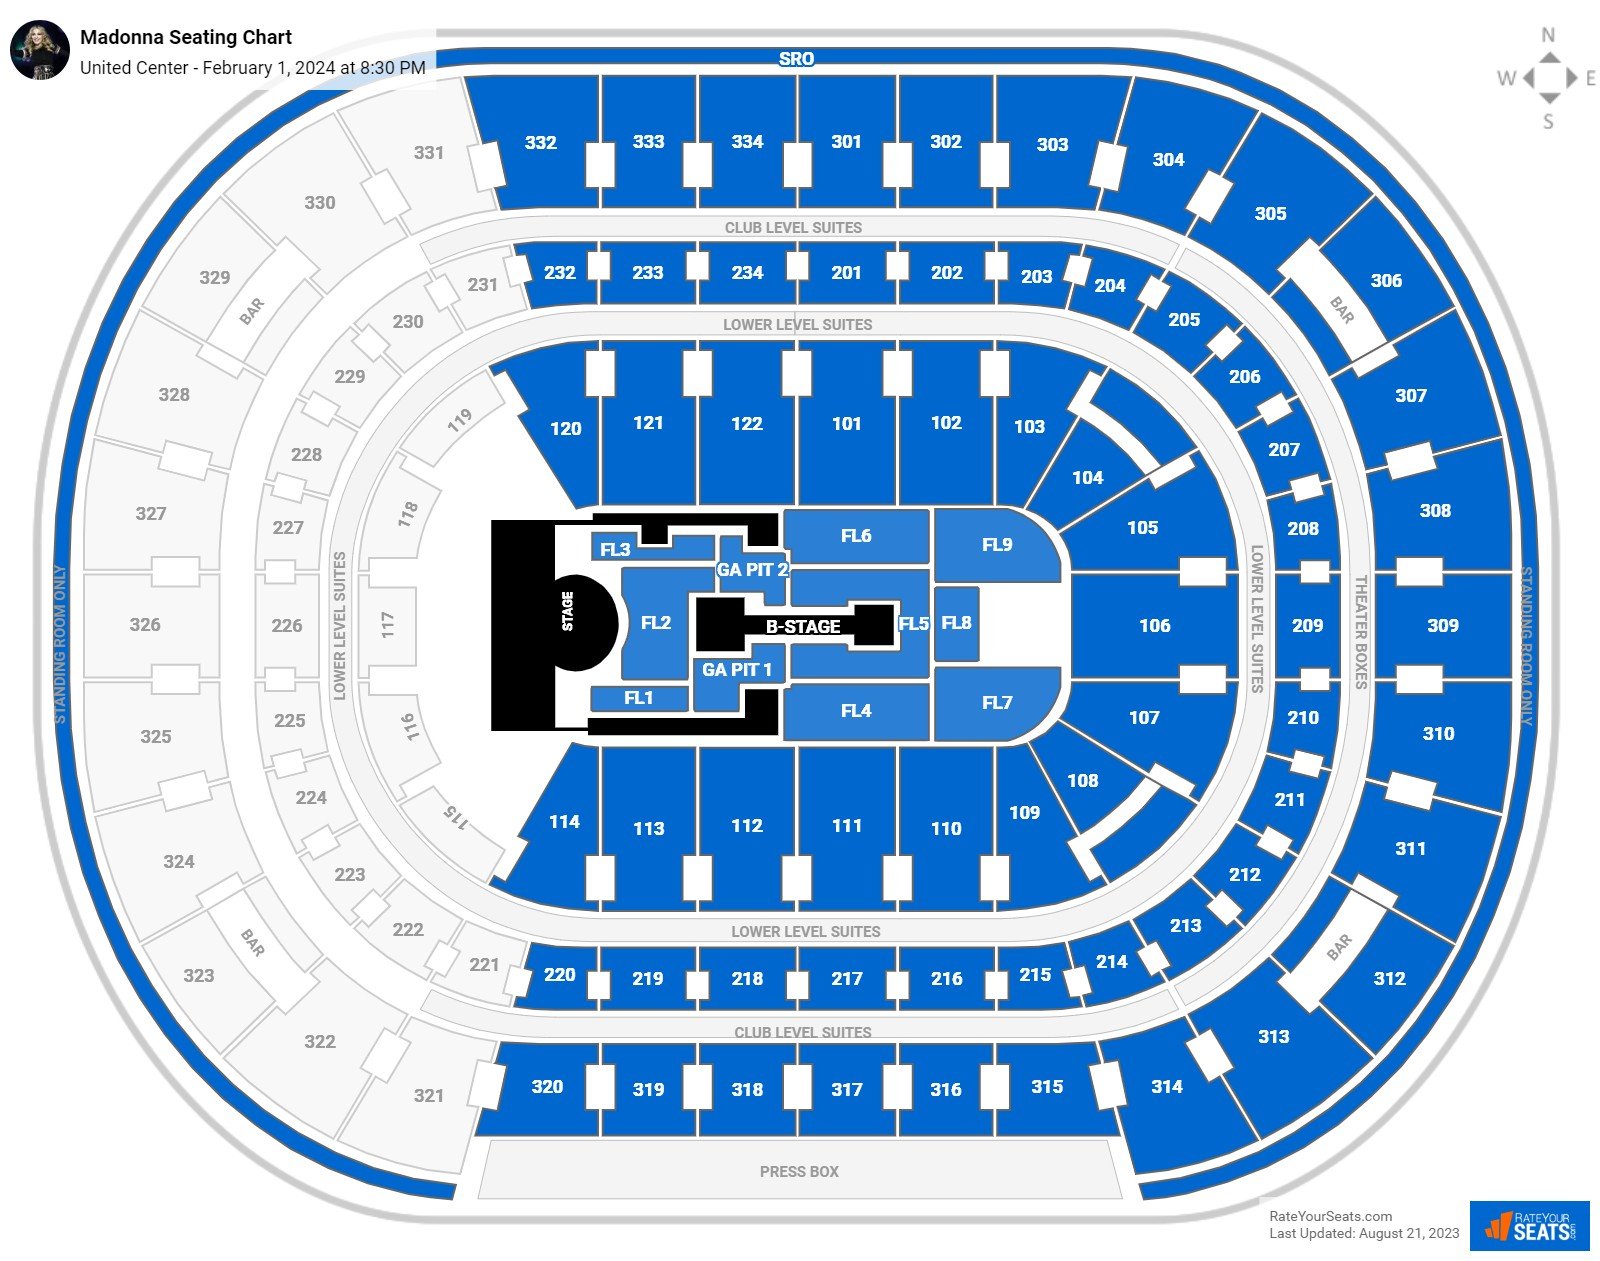 Madonna seating chart United Center